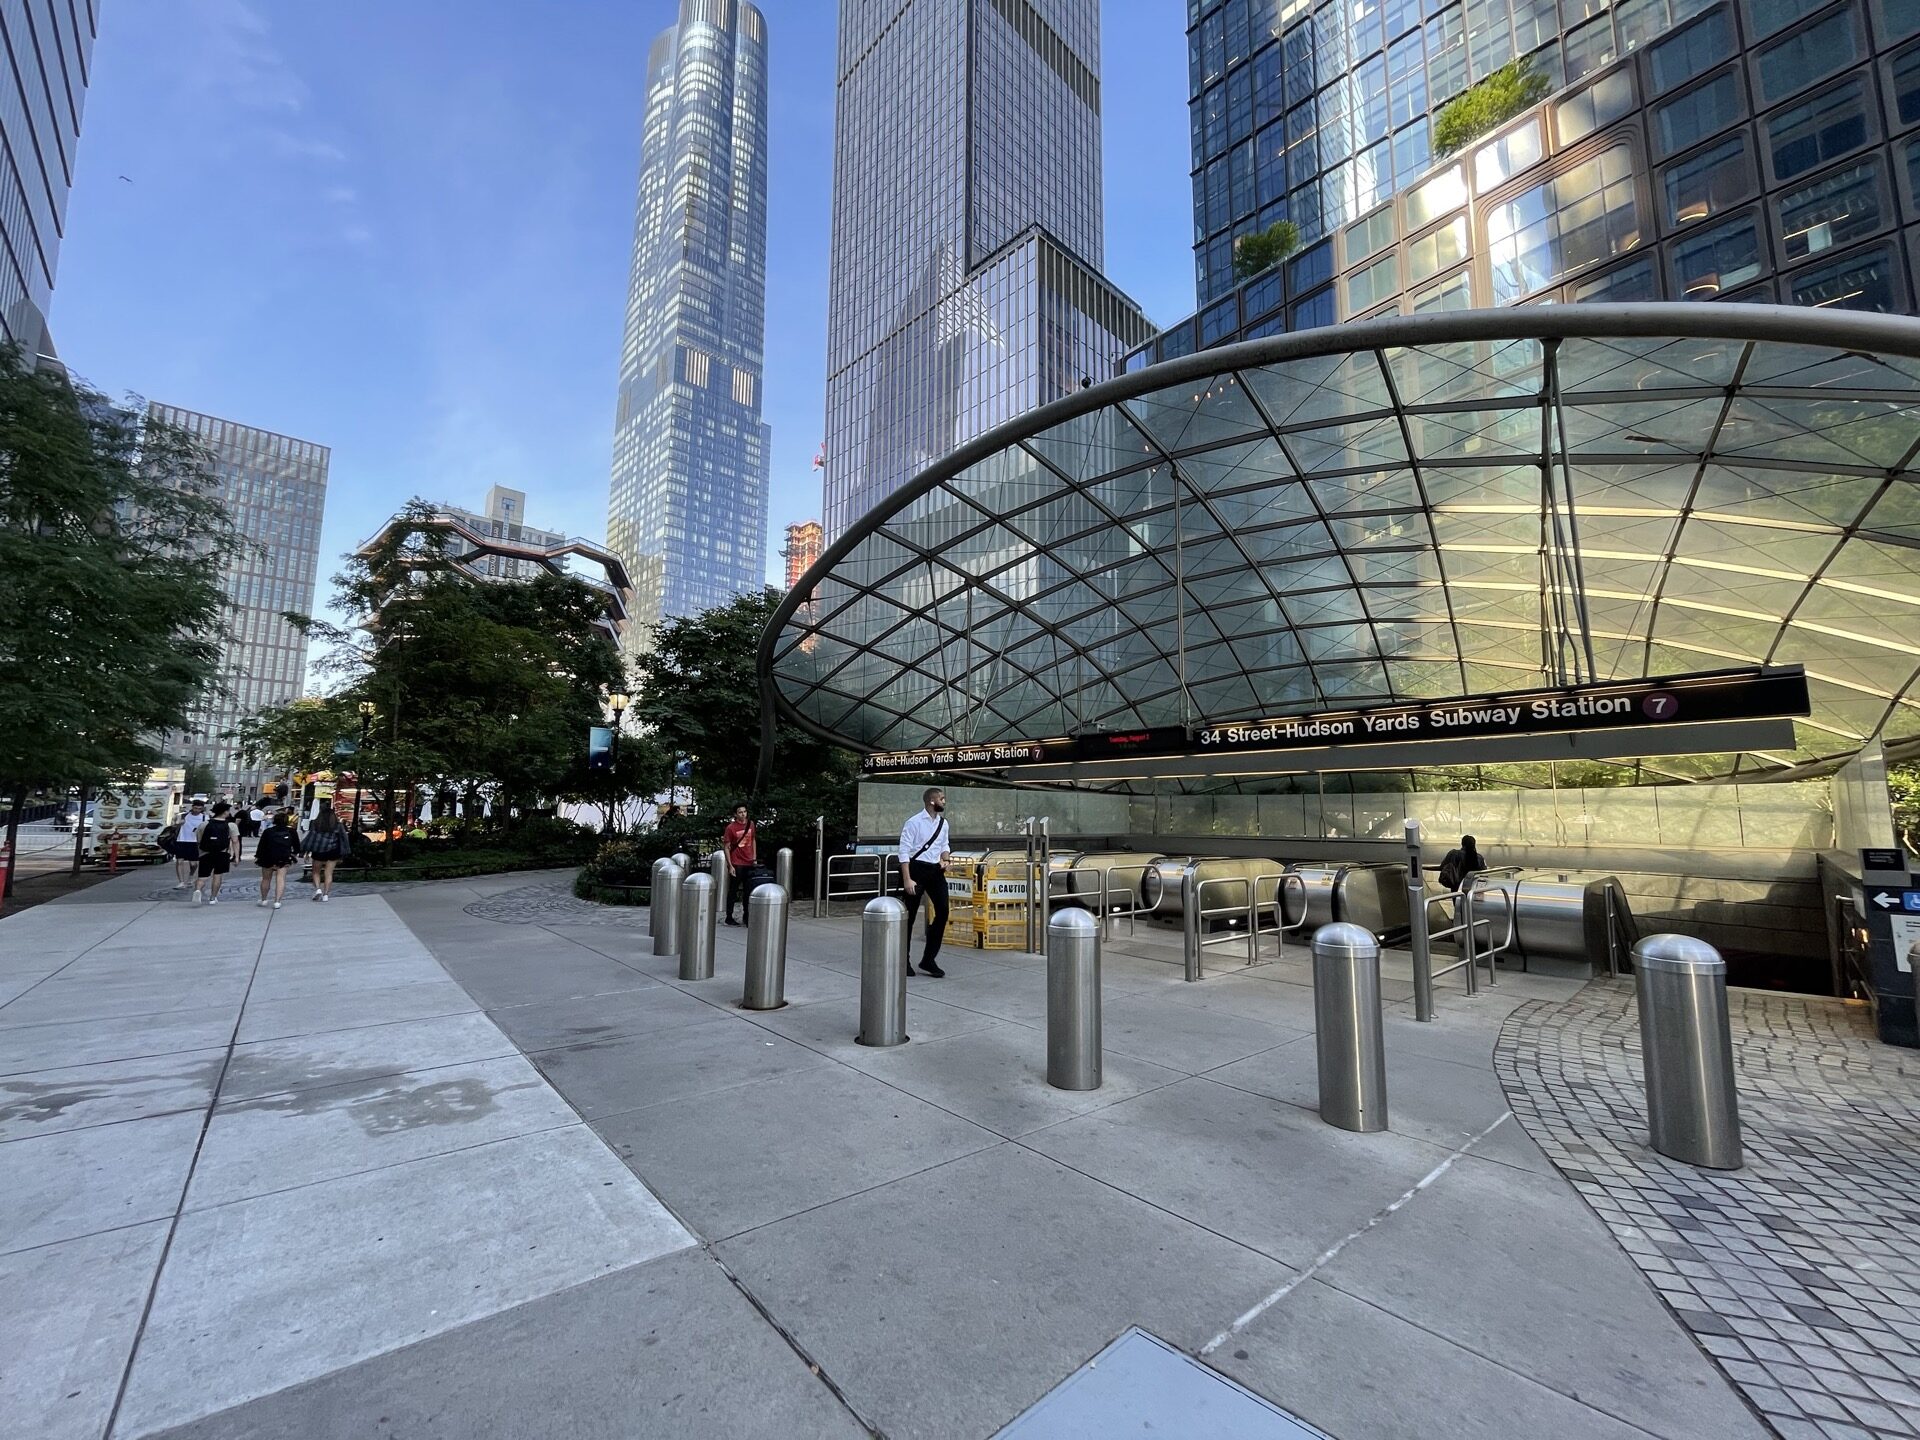 A photo of the entrance to 34th Street-Hudson Yards Station